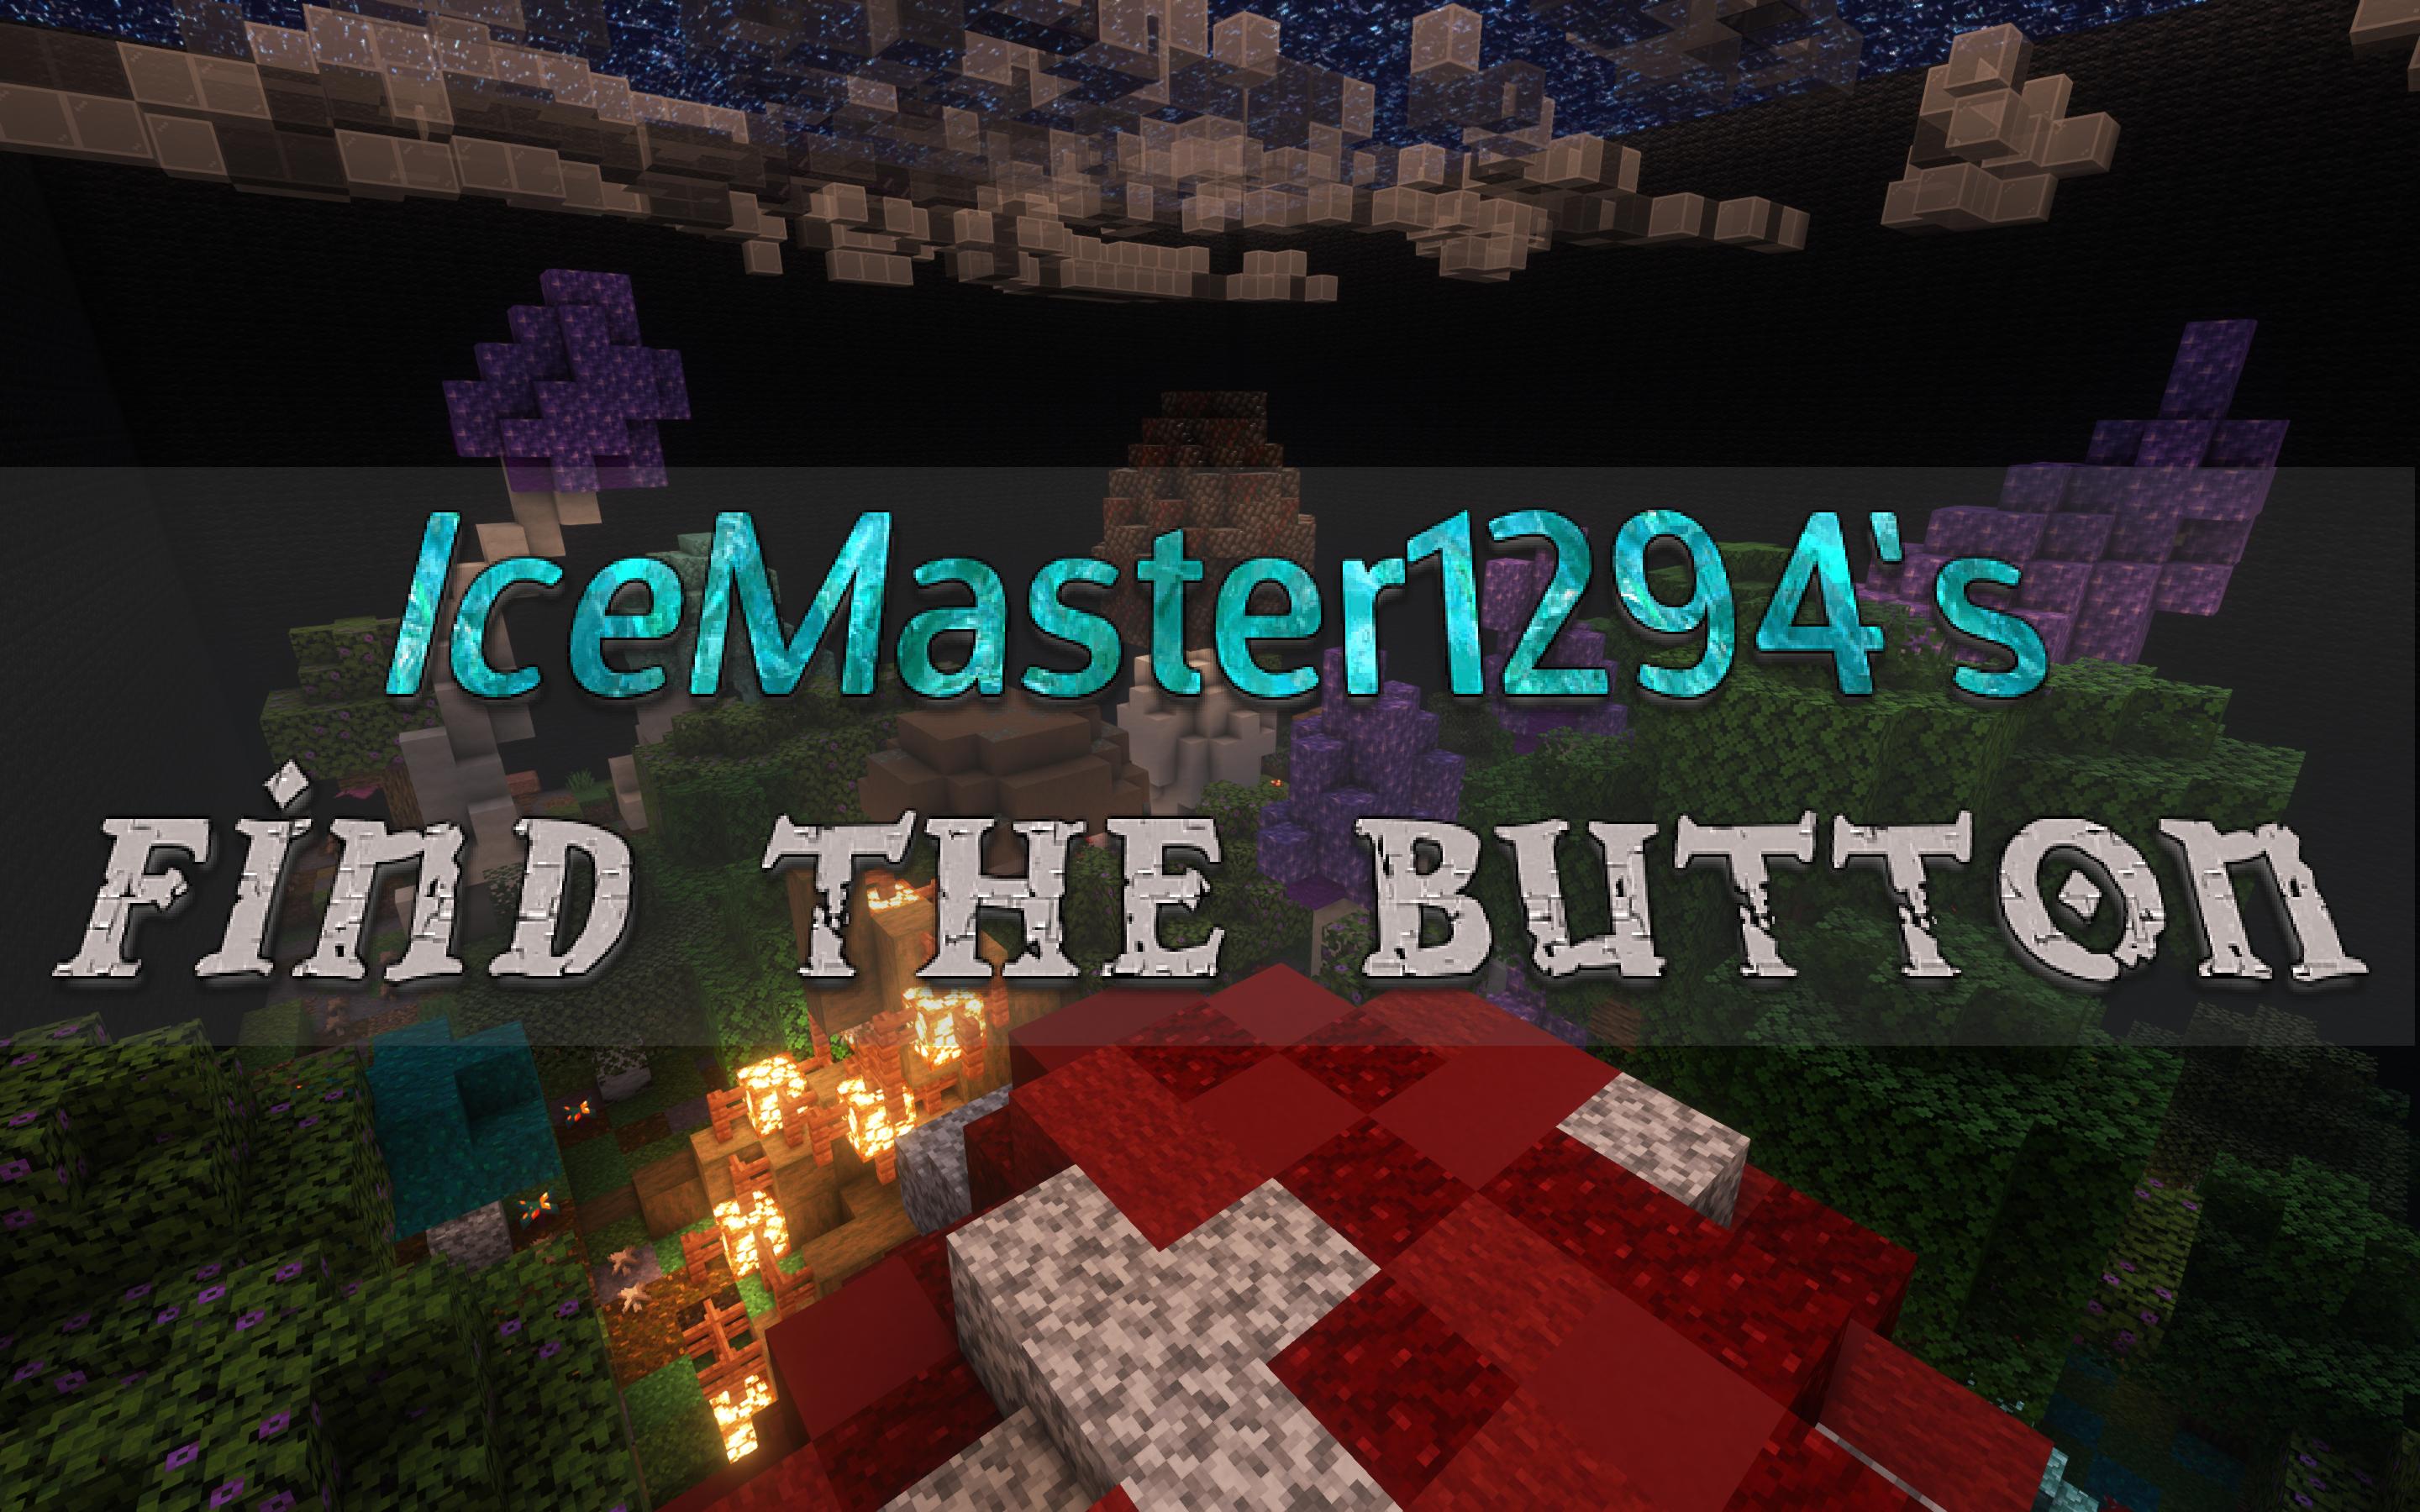 Find the Button by IceMaster1294 screenshot 1